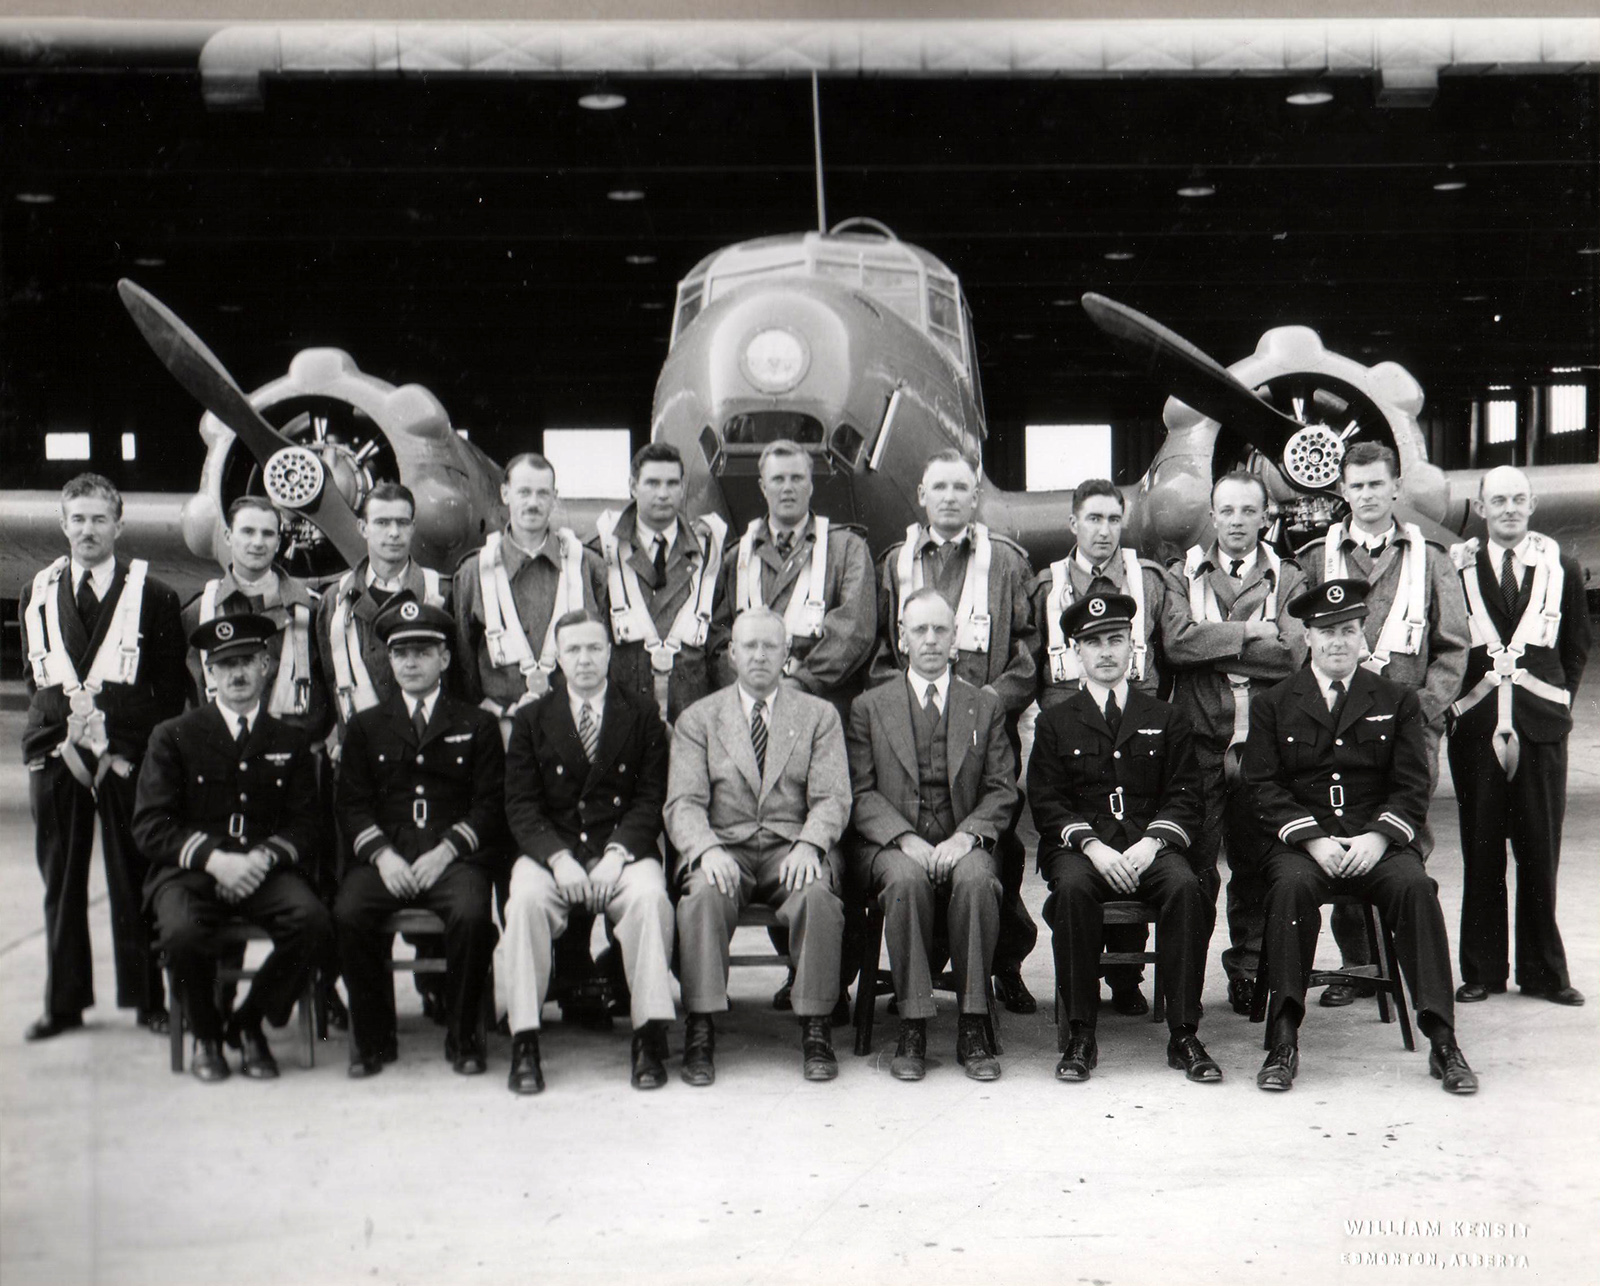 1940: Wop May with original pilot staff of No. 2 Air Observer School